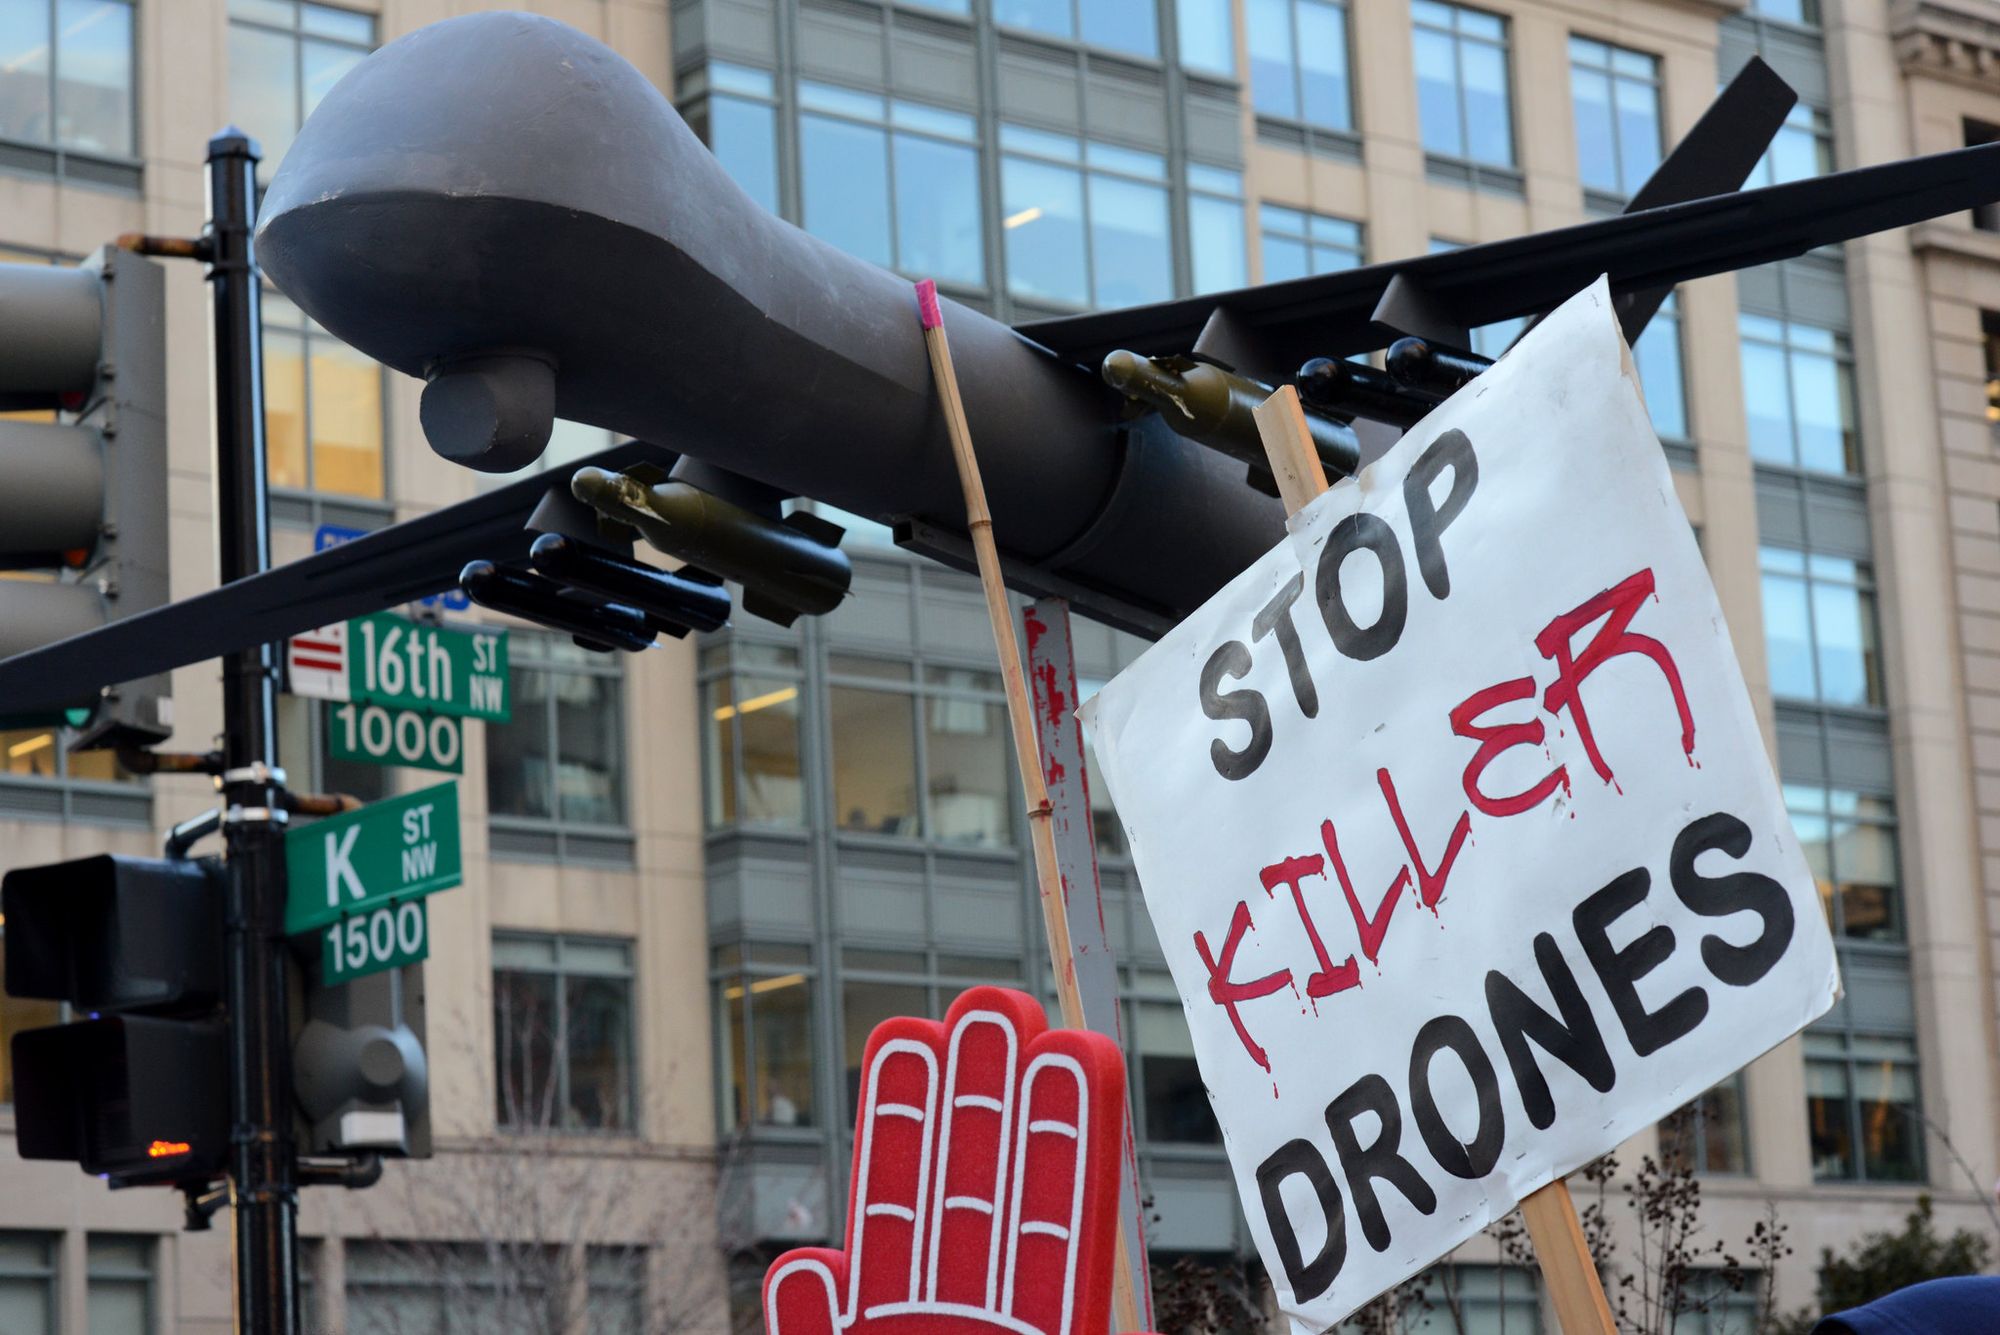 Canada Is Buying A Fleet Of Armed Drones. We Should All Be Worried